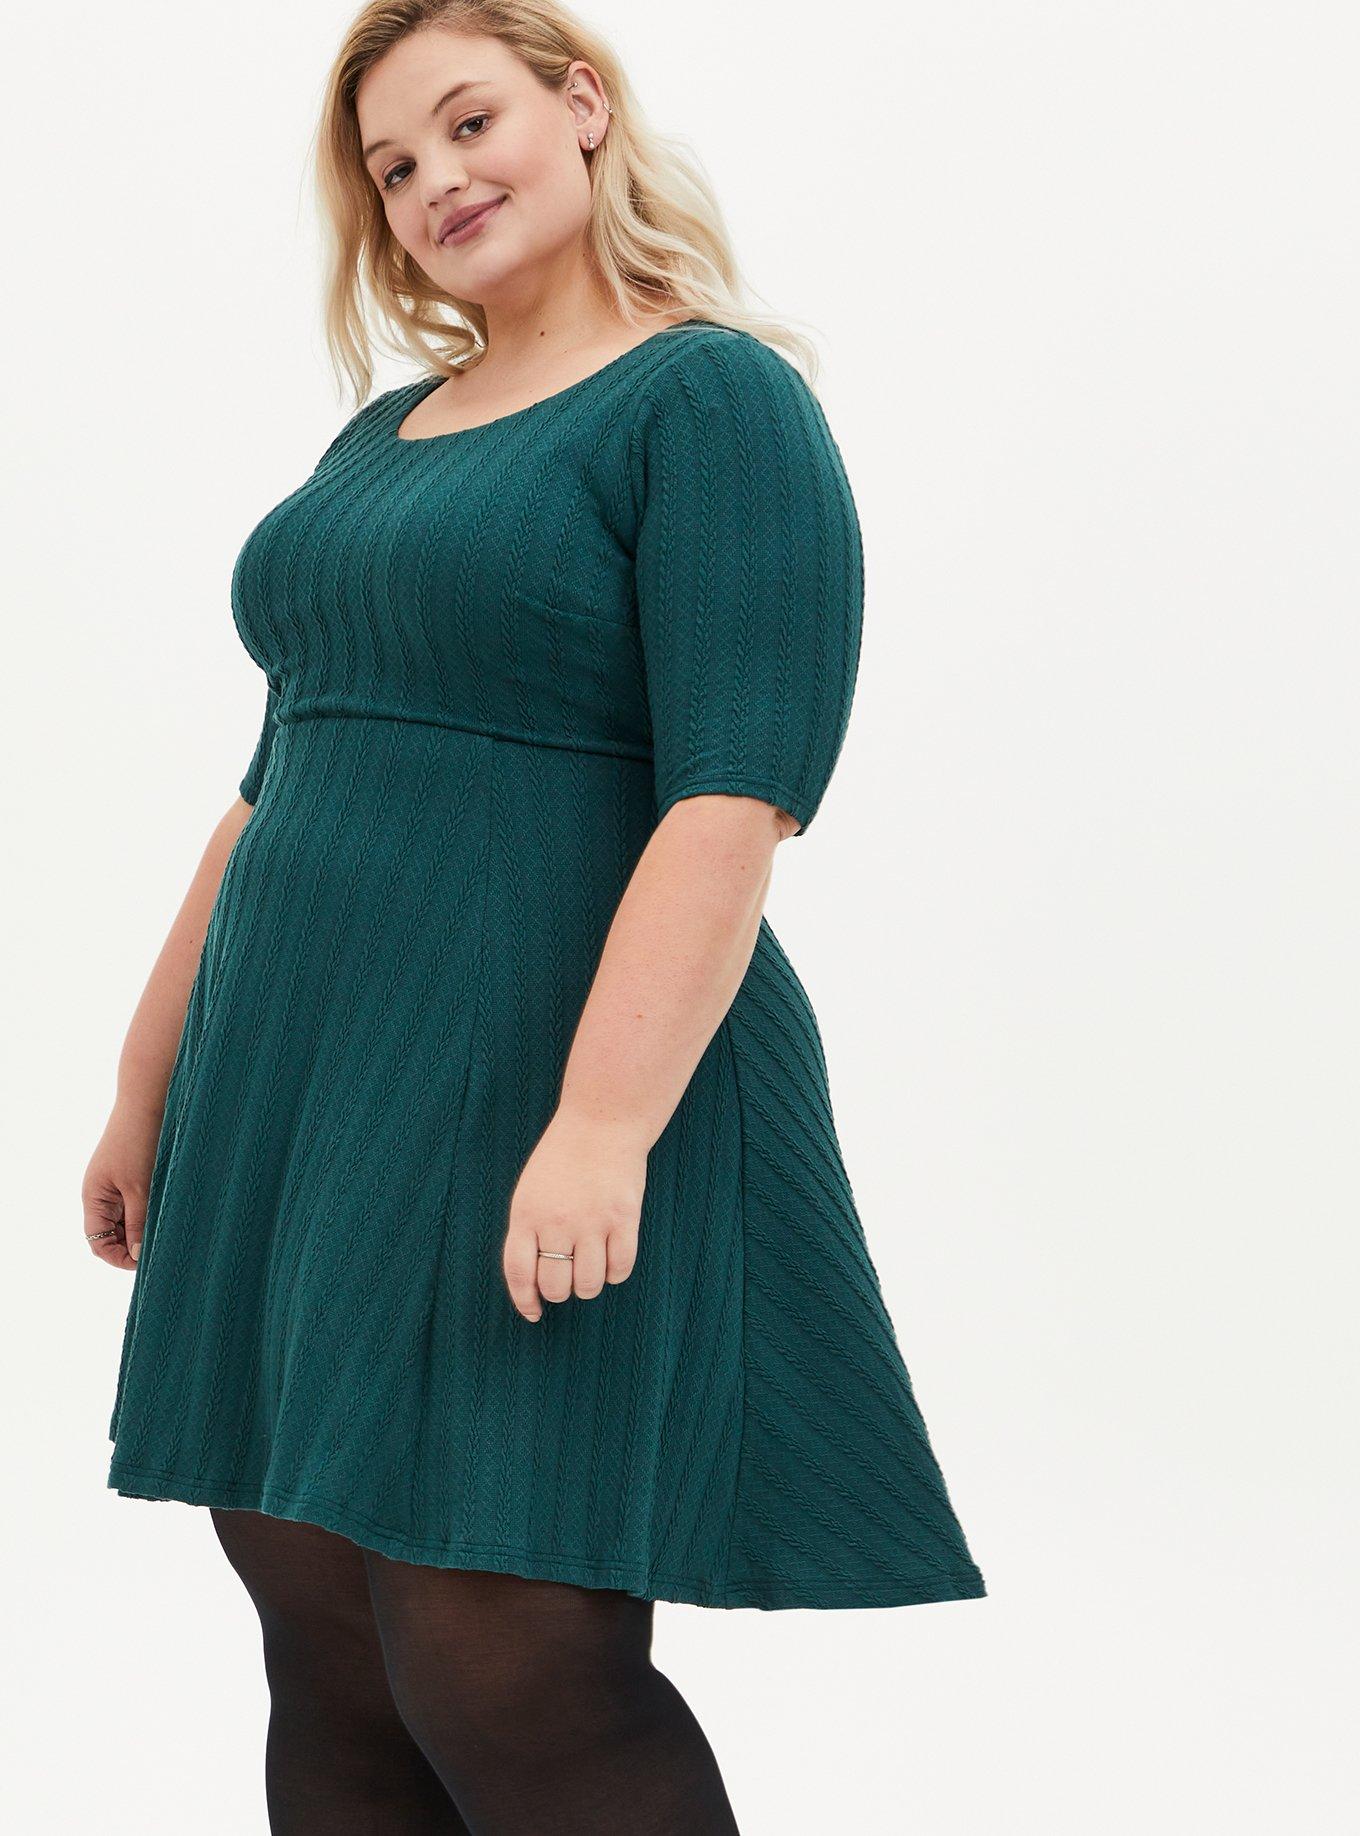 Torrid Plus Size Women's Clothing for sale in Dallas, Texas